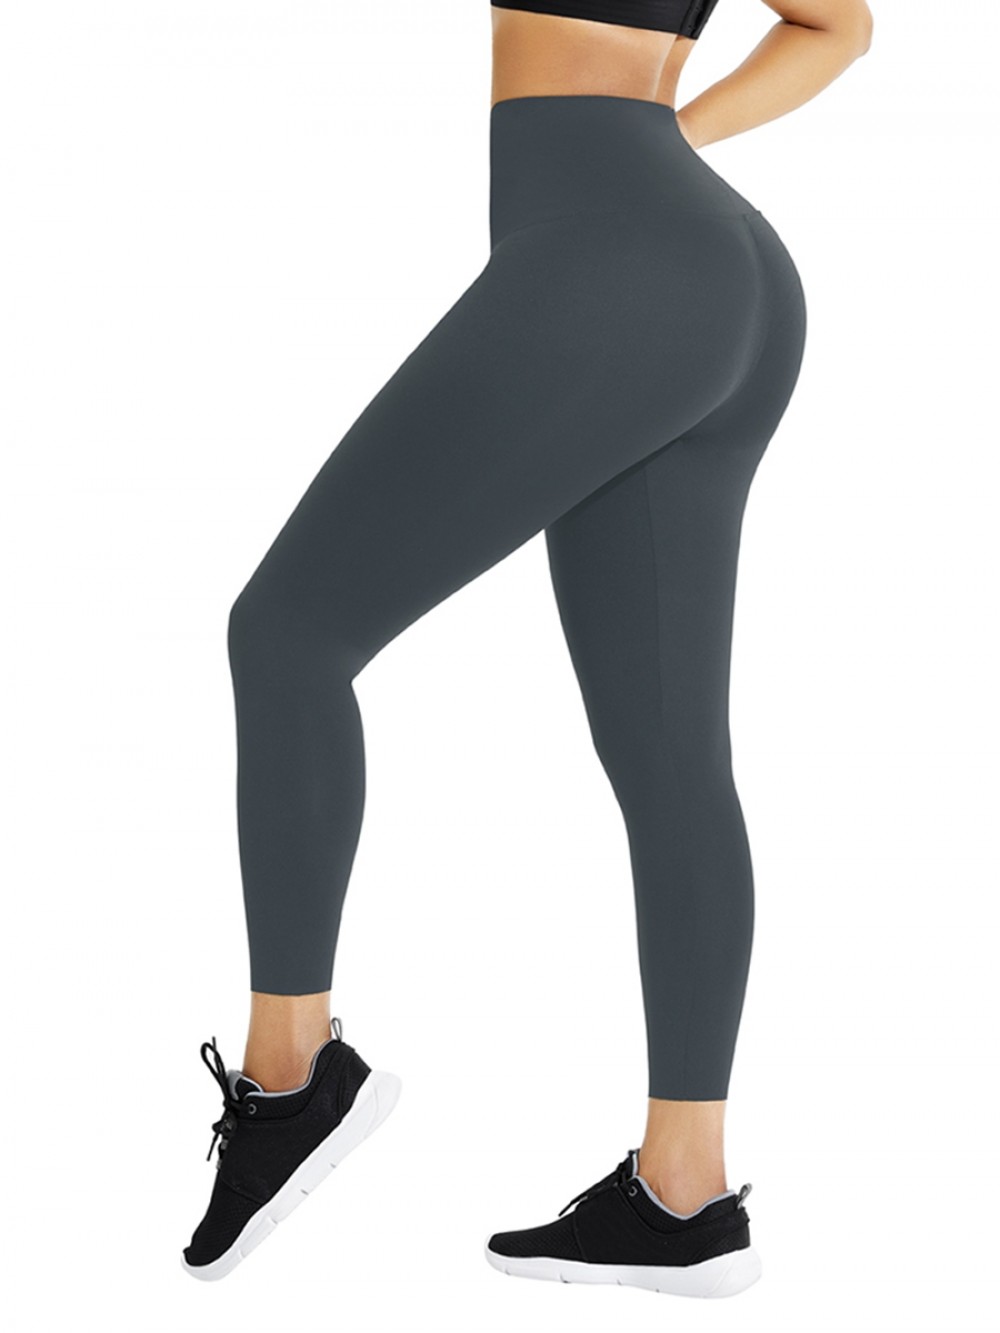 Gray Waist Trainer Leggings With Hooks Highest Compression